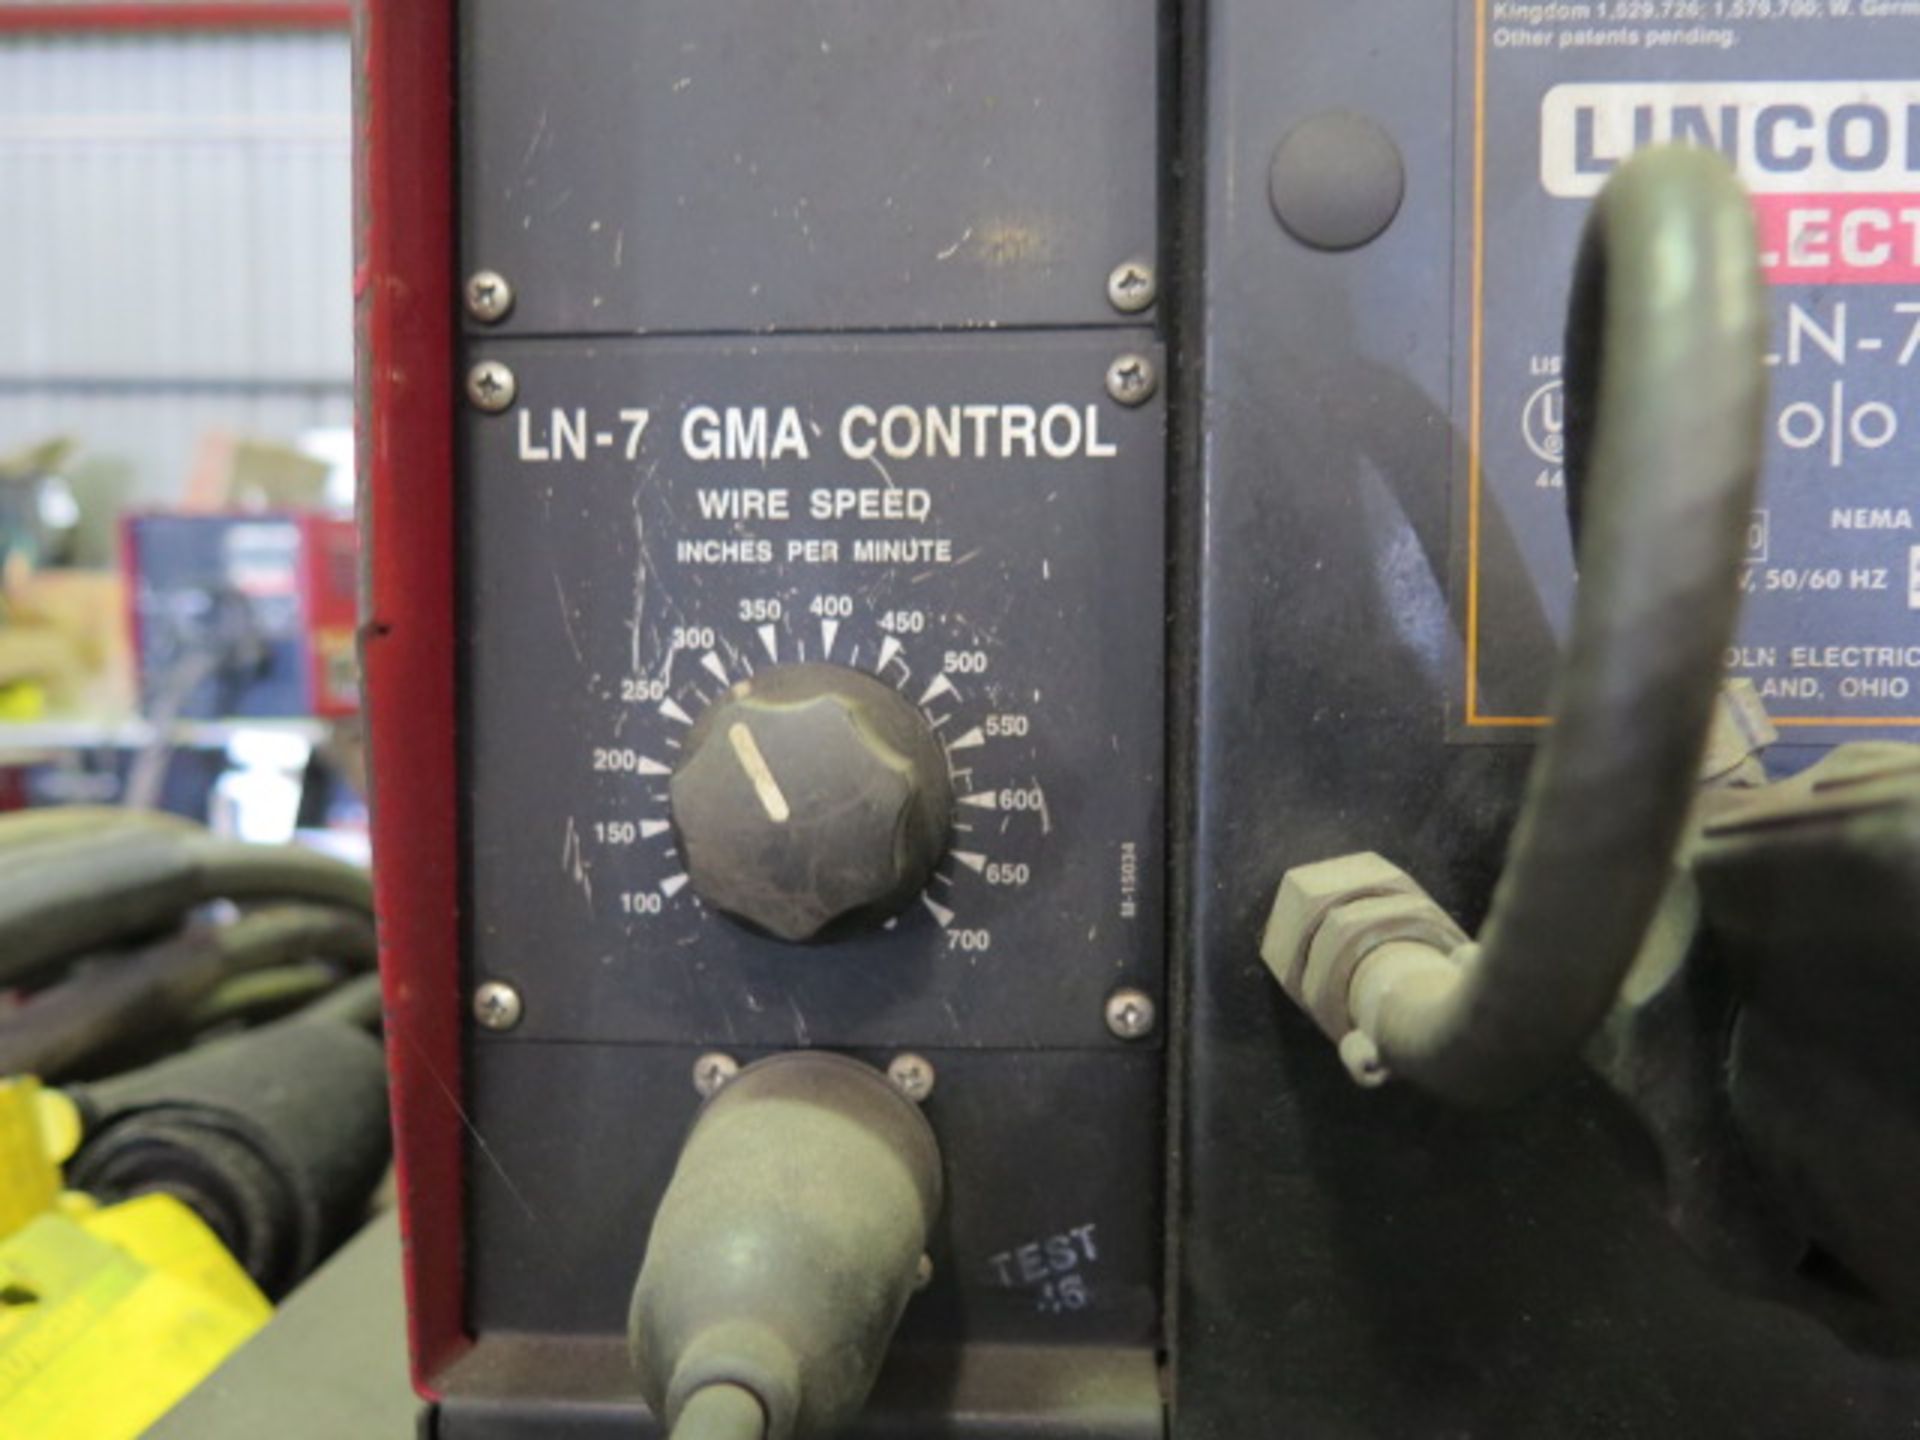 Lincoln CV-300 Arc Welding Power Source w/ Lincoln LN-7 Wire Feed (SOLD AS-IS - NO WARRANTY) - Image 7 of 12